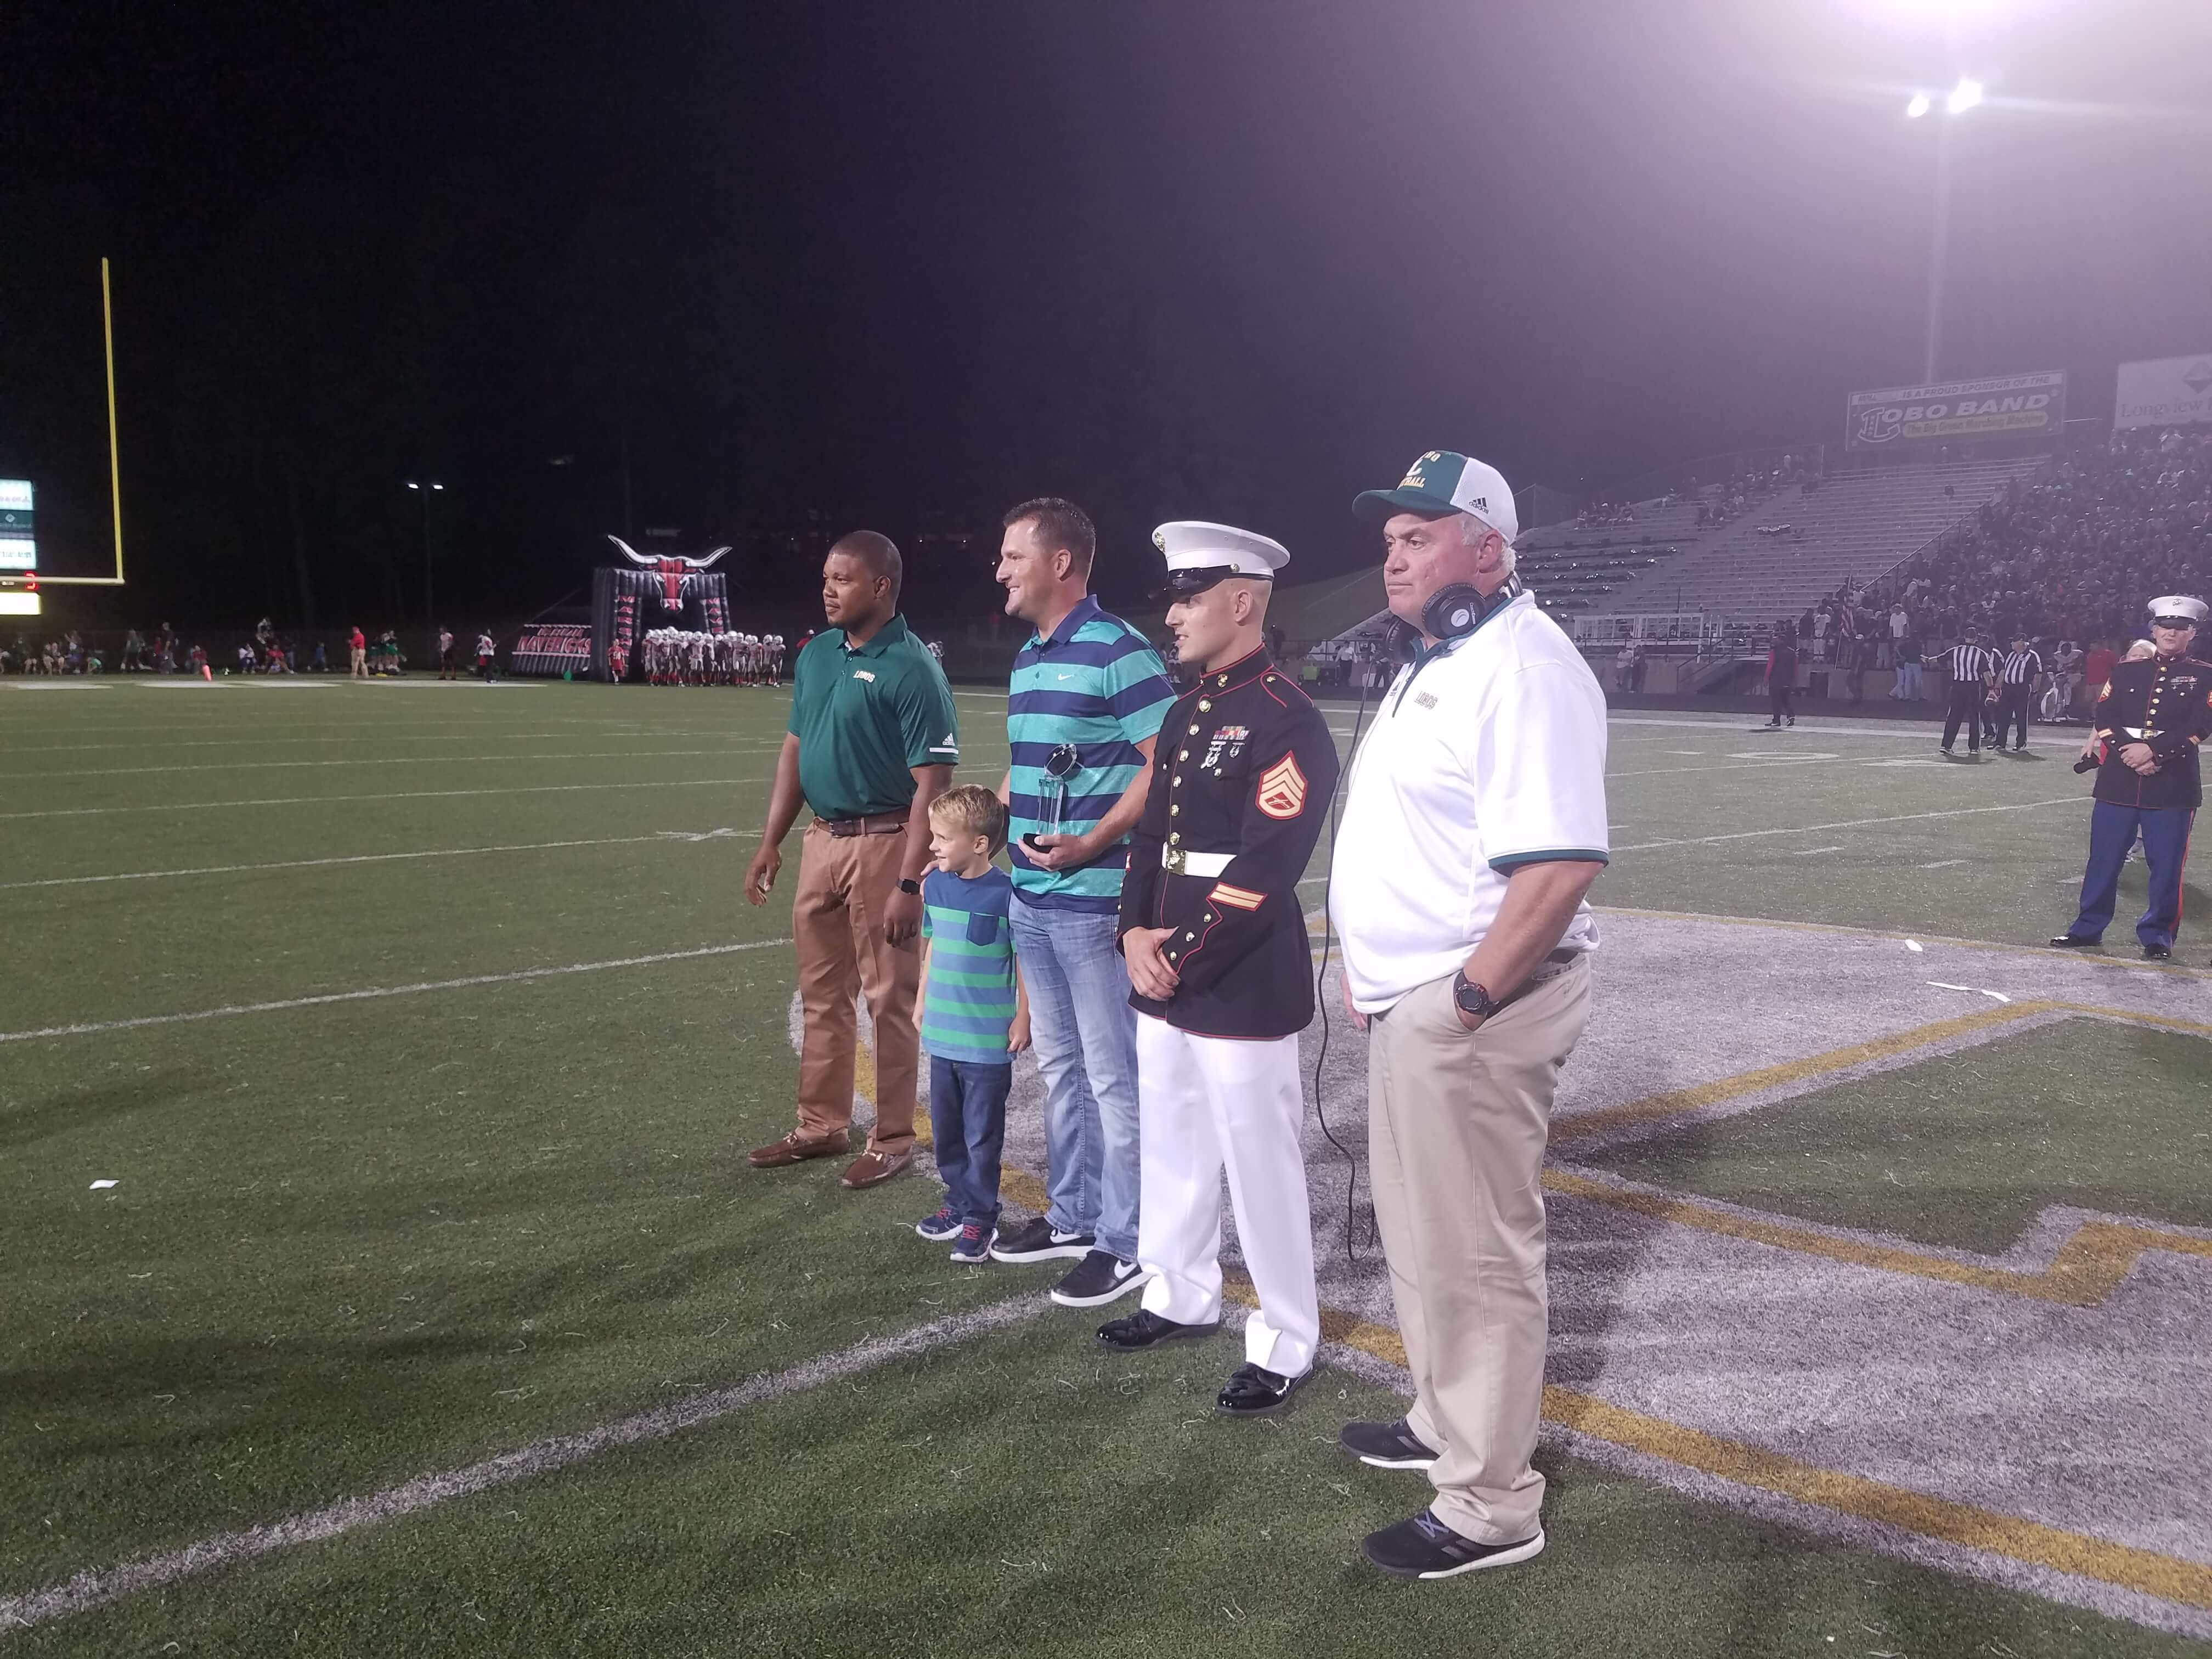 High School Football Hall of Fame Athletes,Games, and Scores on Rivalry